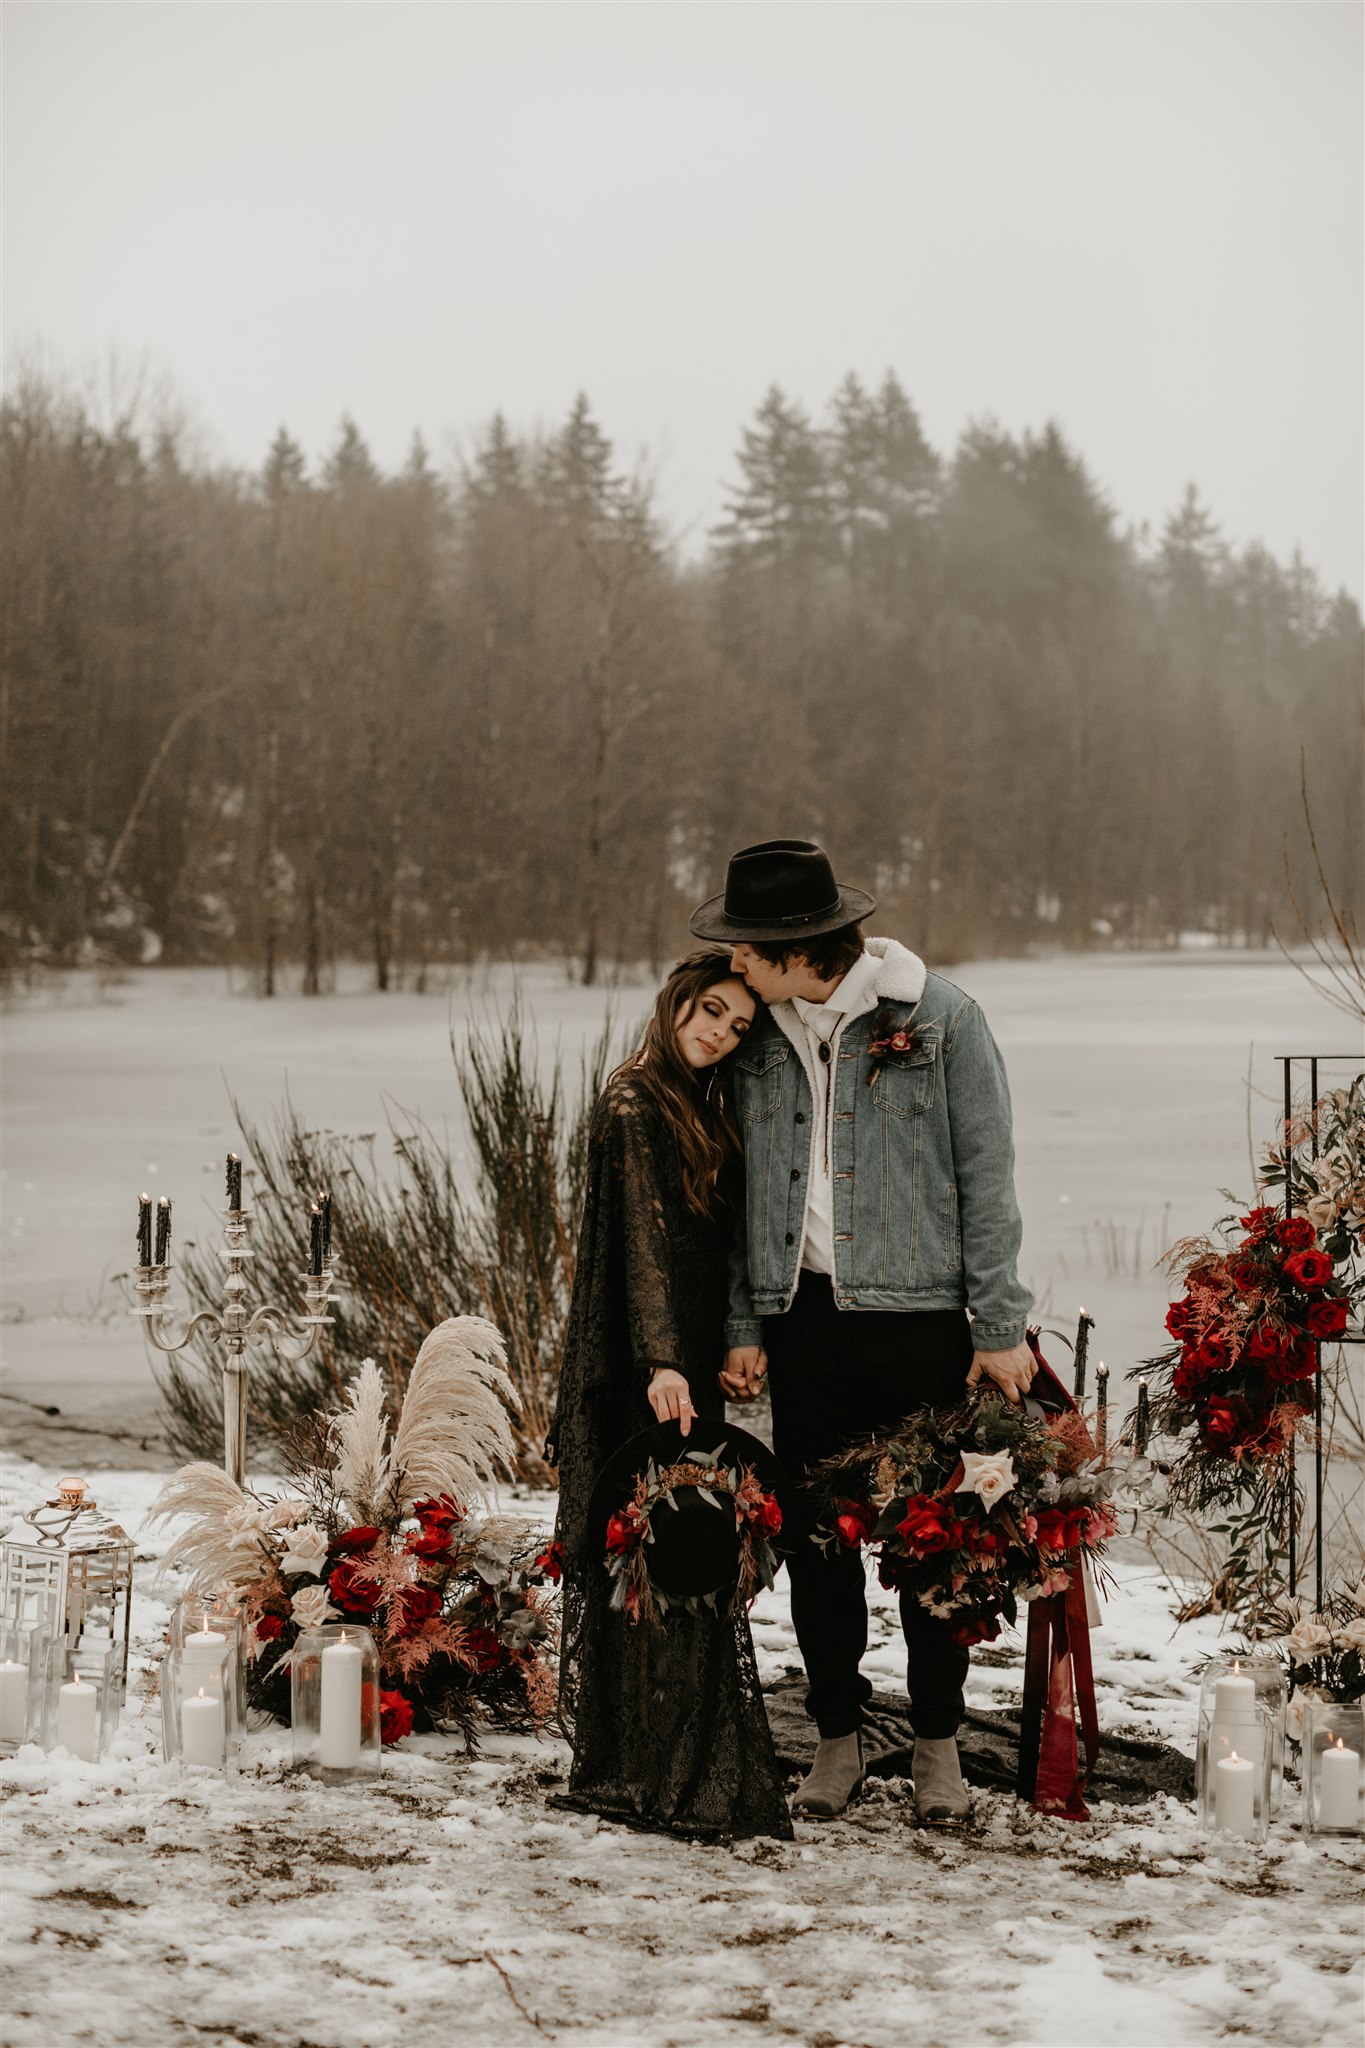 Boho chic bride in furry jacket and groom in jean jacket on snowy river bank in front of boho ceremony set up